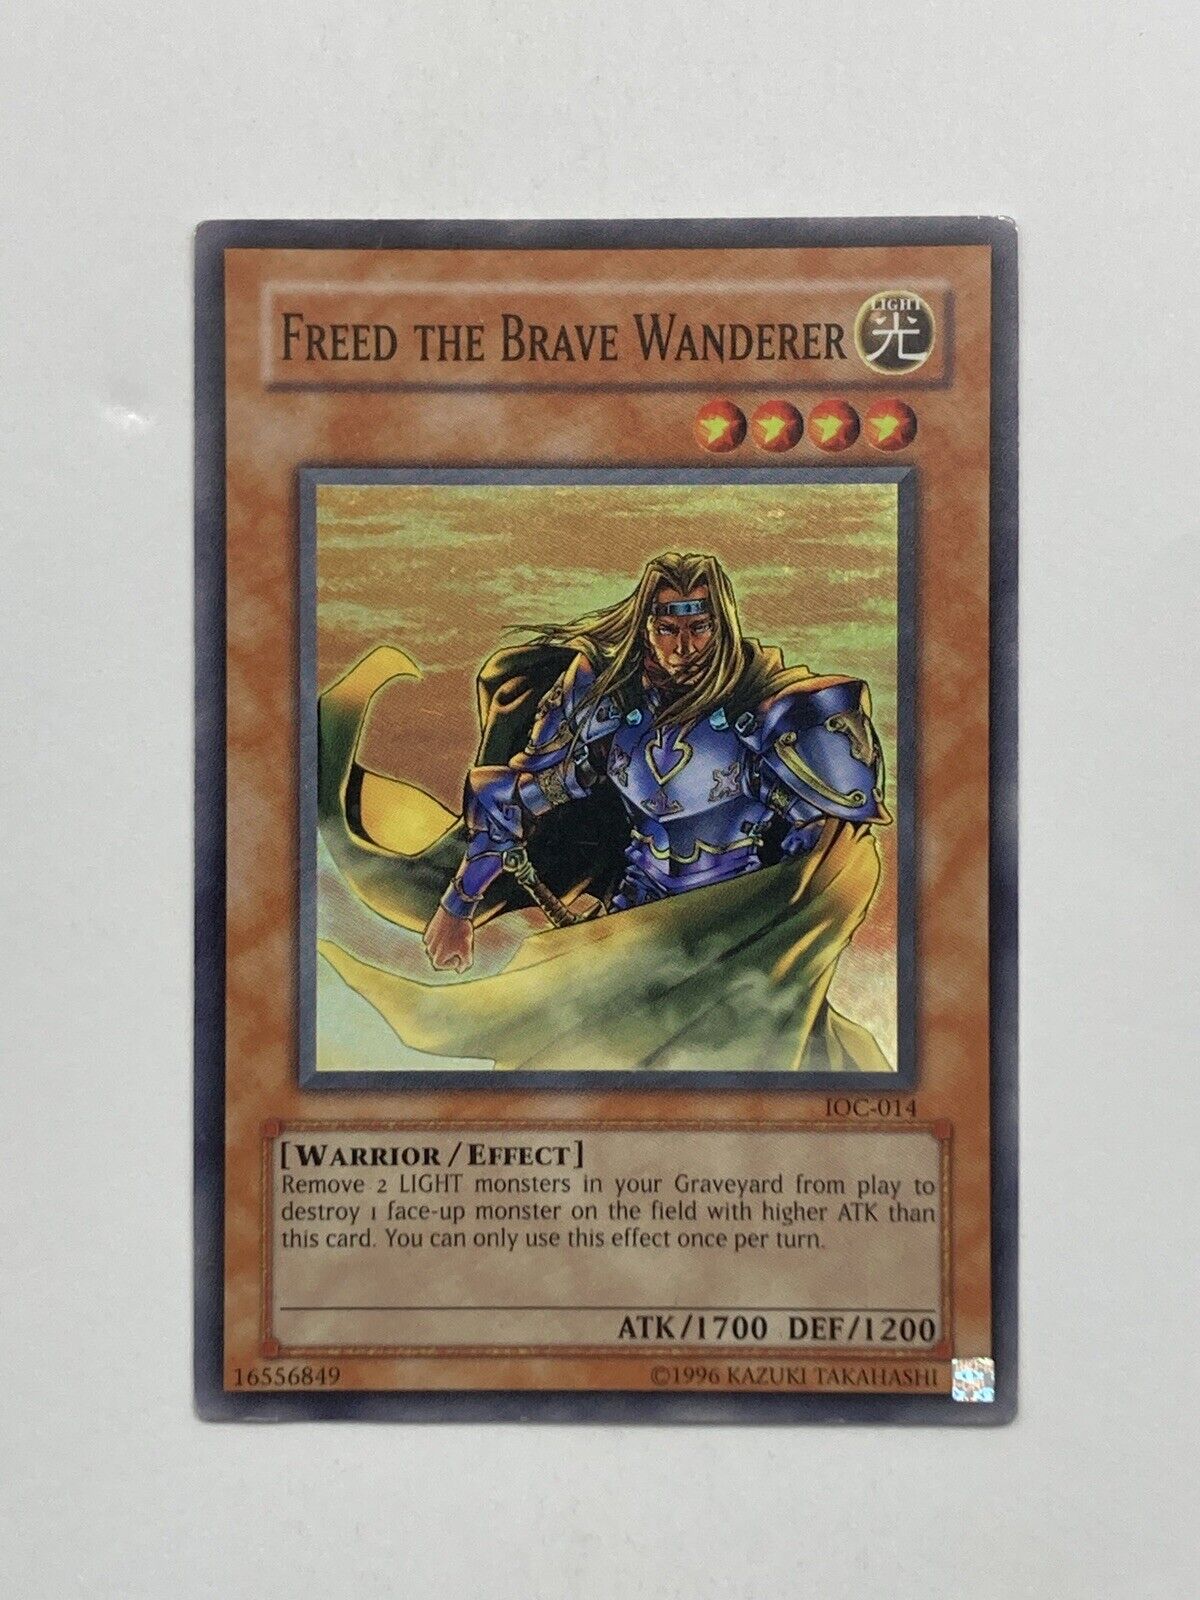 Yu-Gi-Oh TCG Freed the Brave Wanderer Invasion of Chaos Ioc-014 Unlimited Super